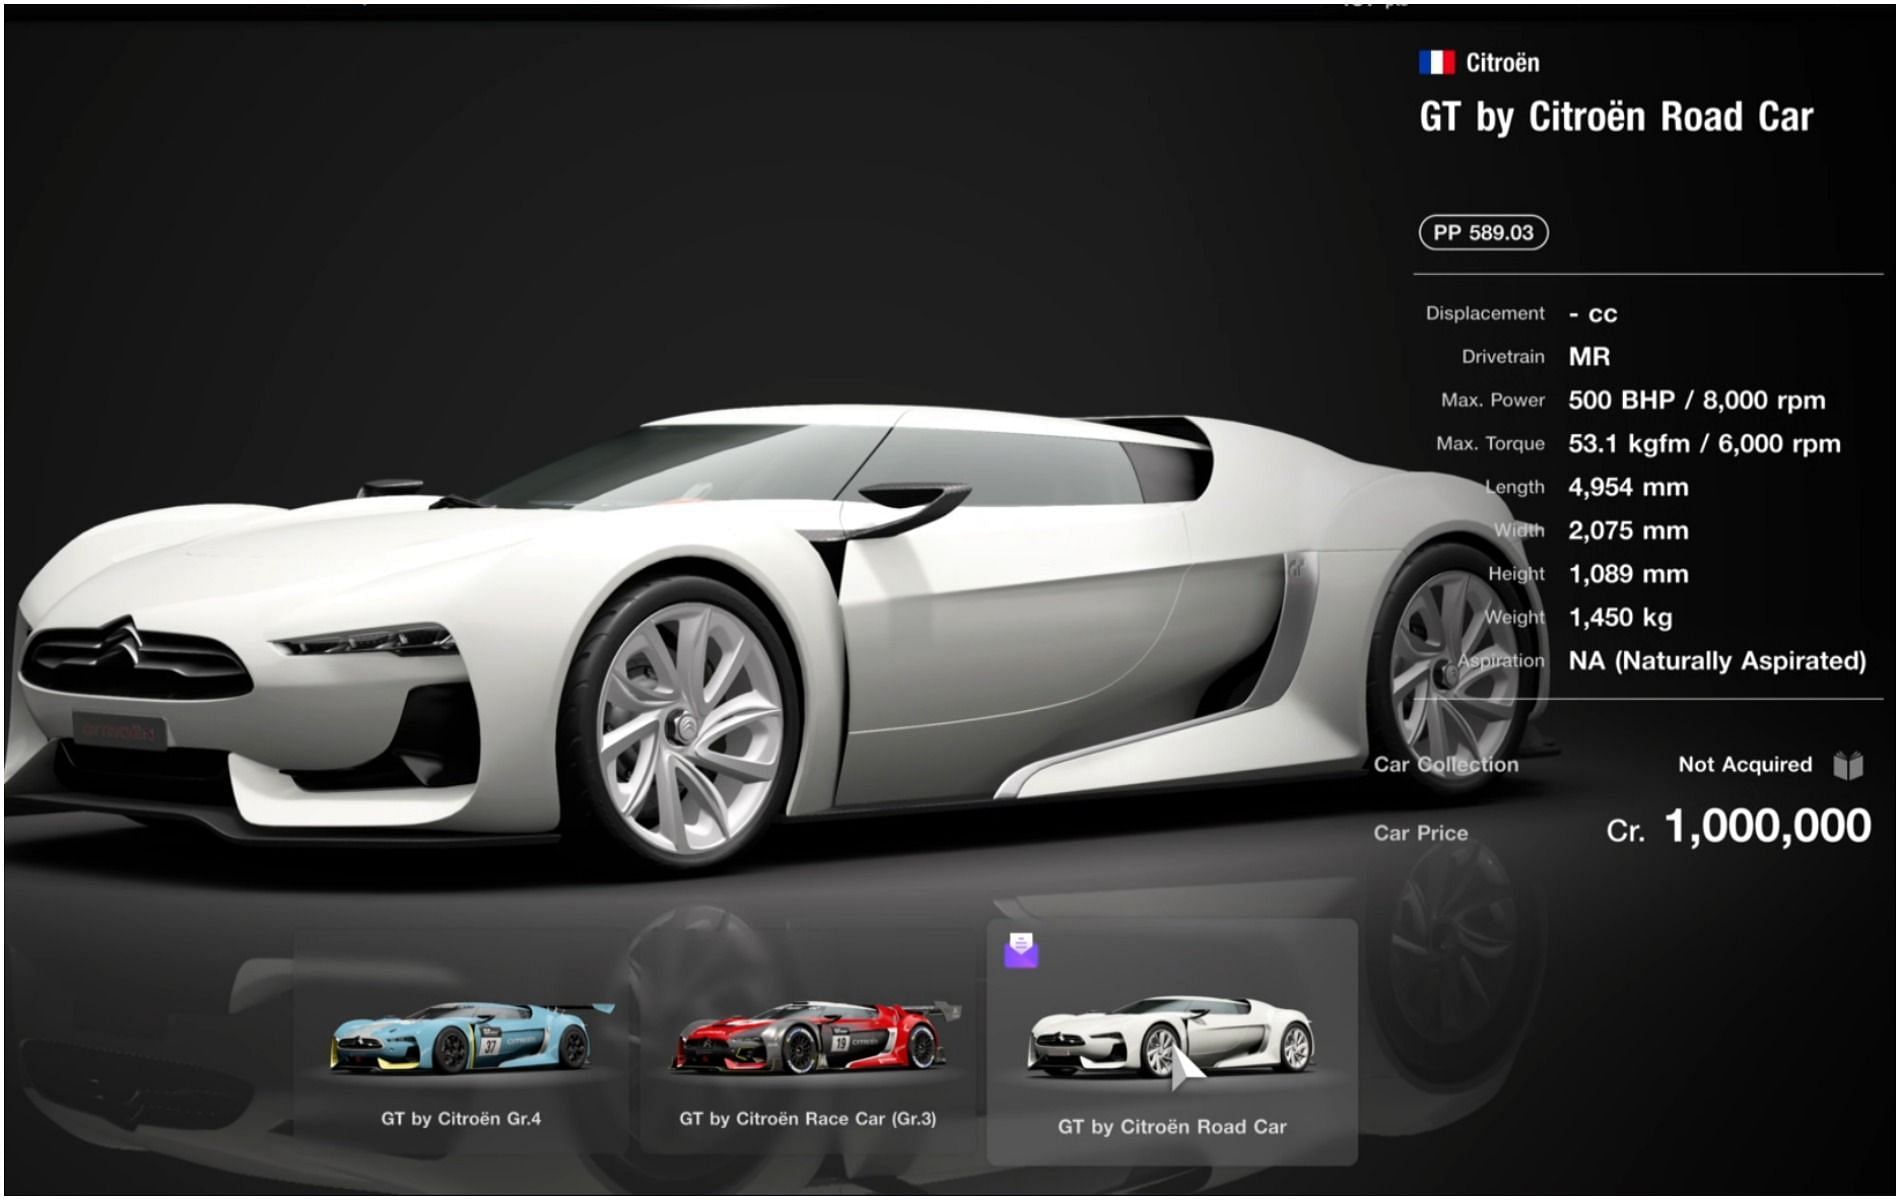 Gran Turismo 7 car list, All cars to unlock or buy in GT7